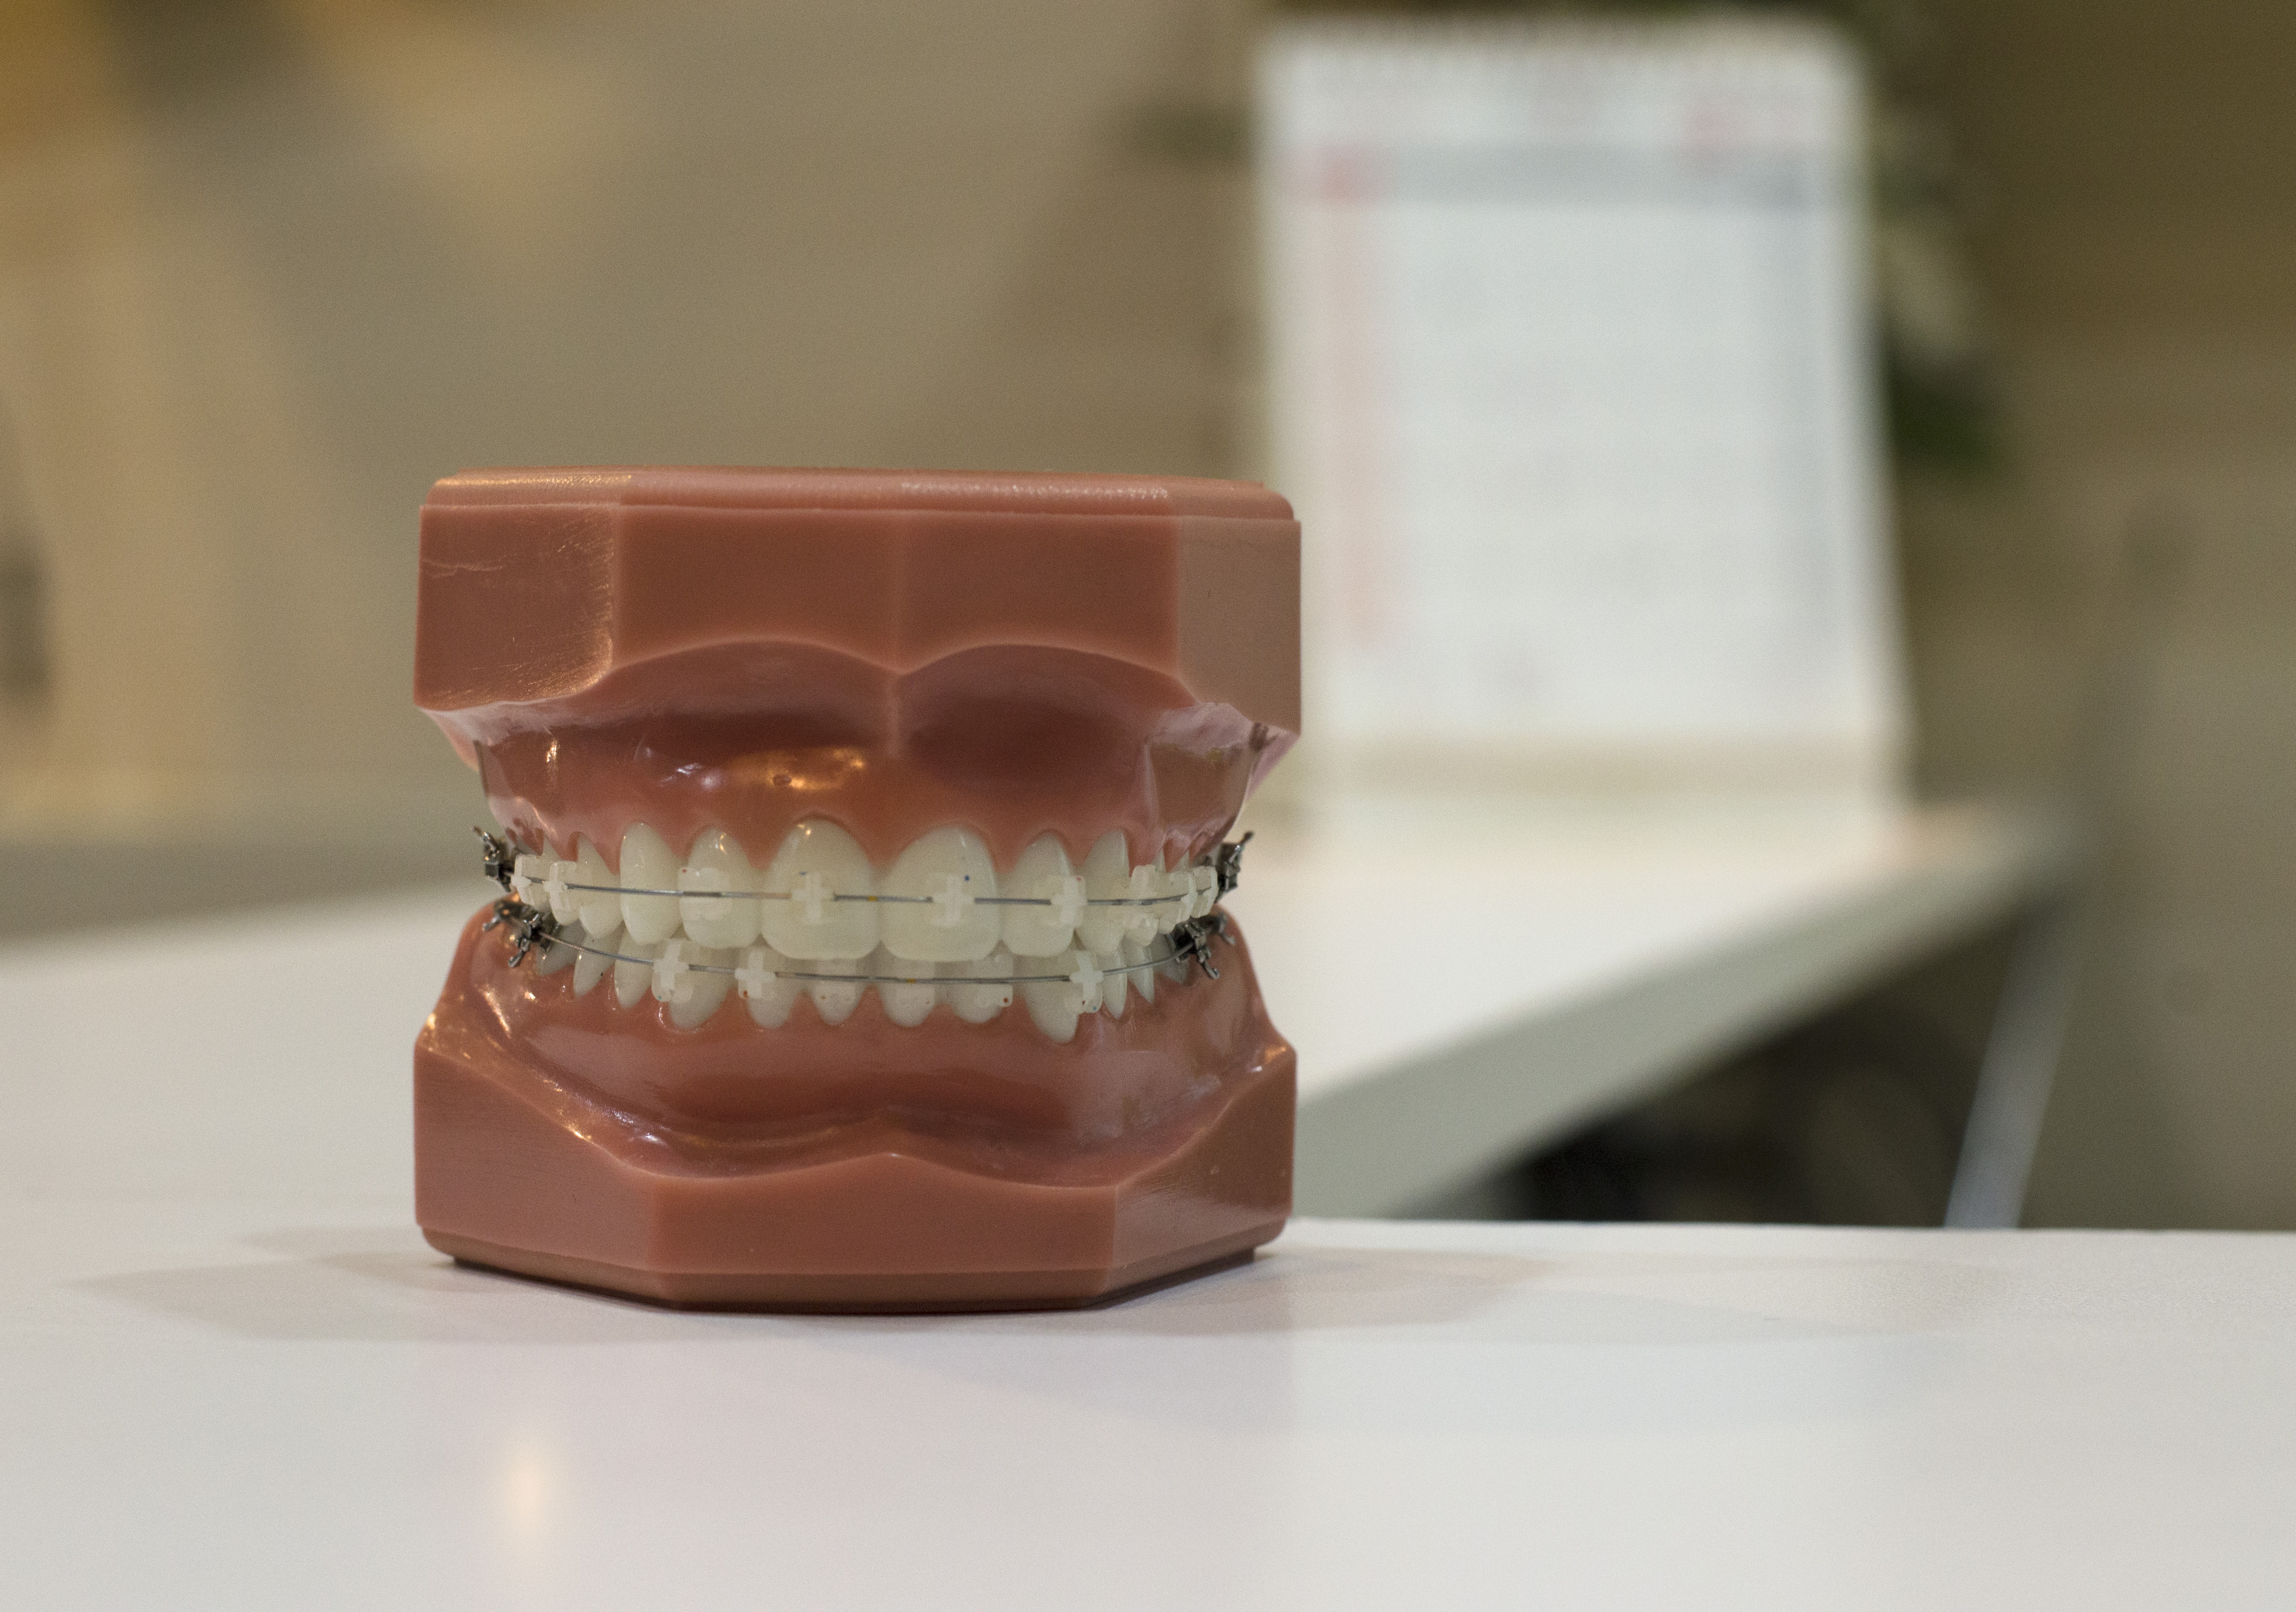 brown dentures on white table